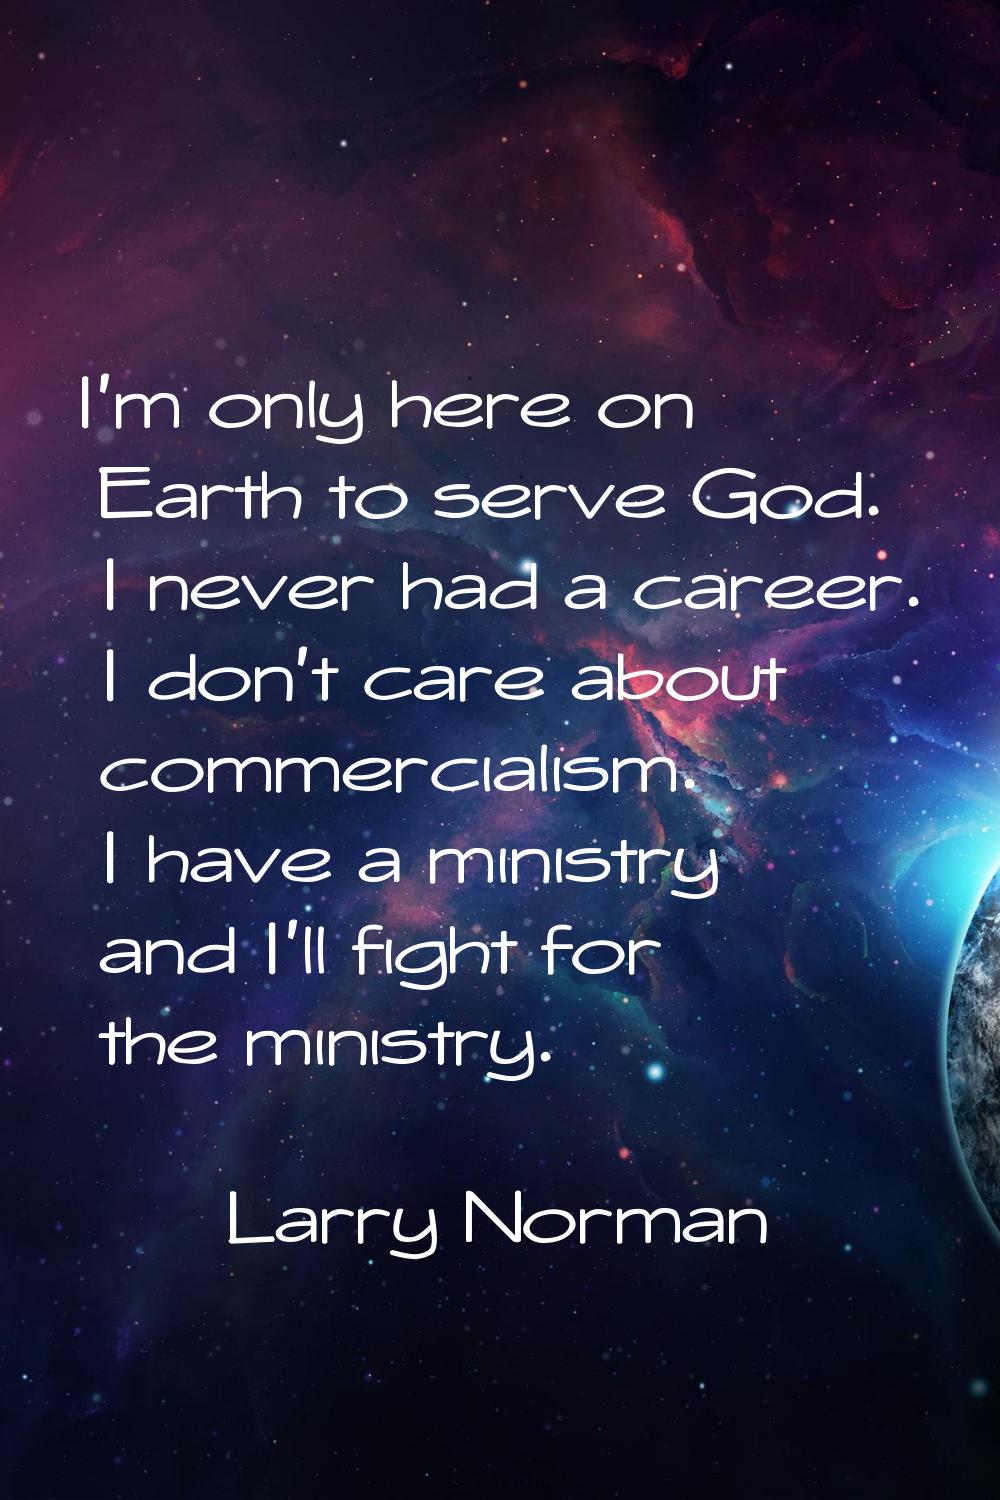 I'm only here on Earth to serve God. I never had a career. I don't care about commercialism. I have